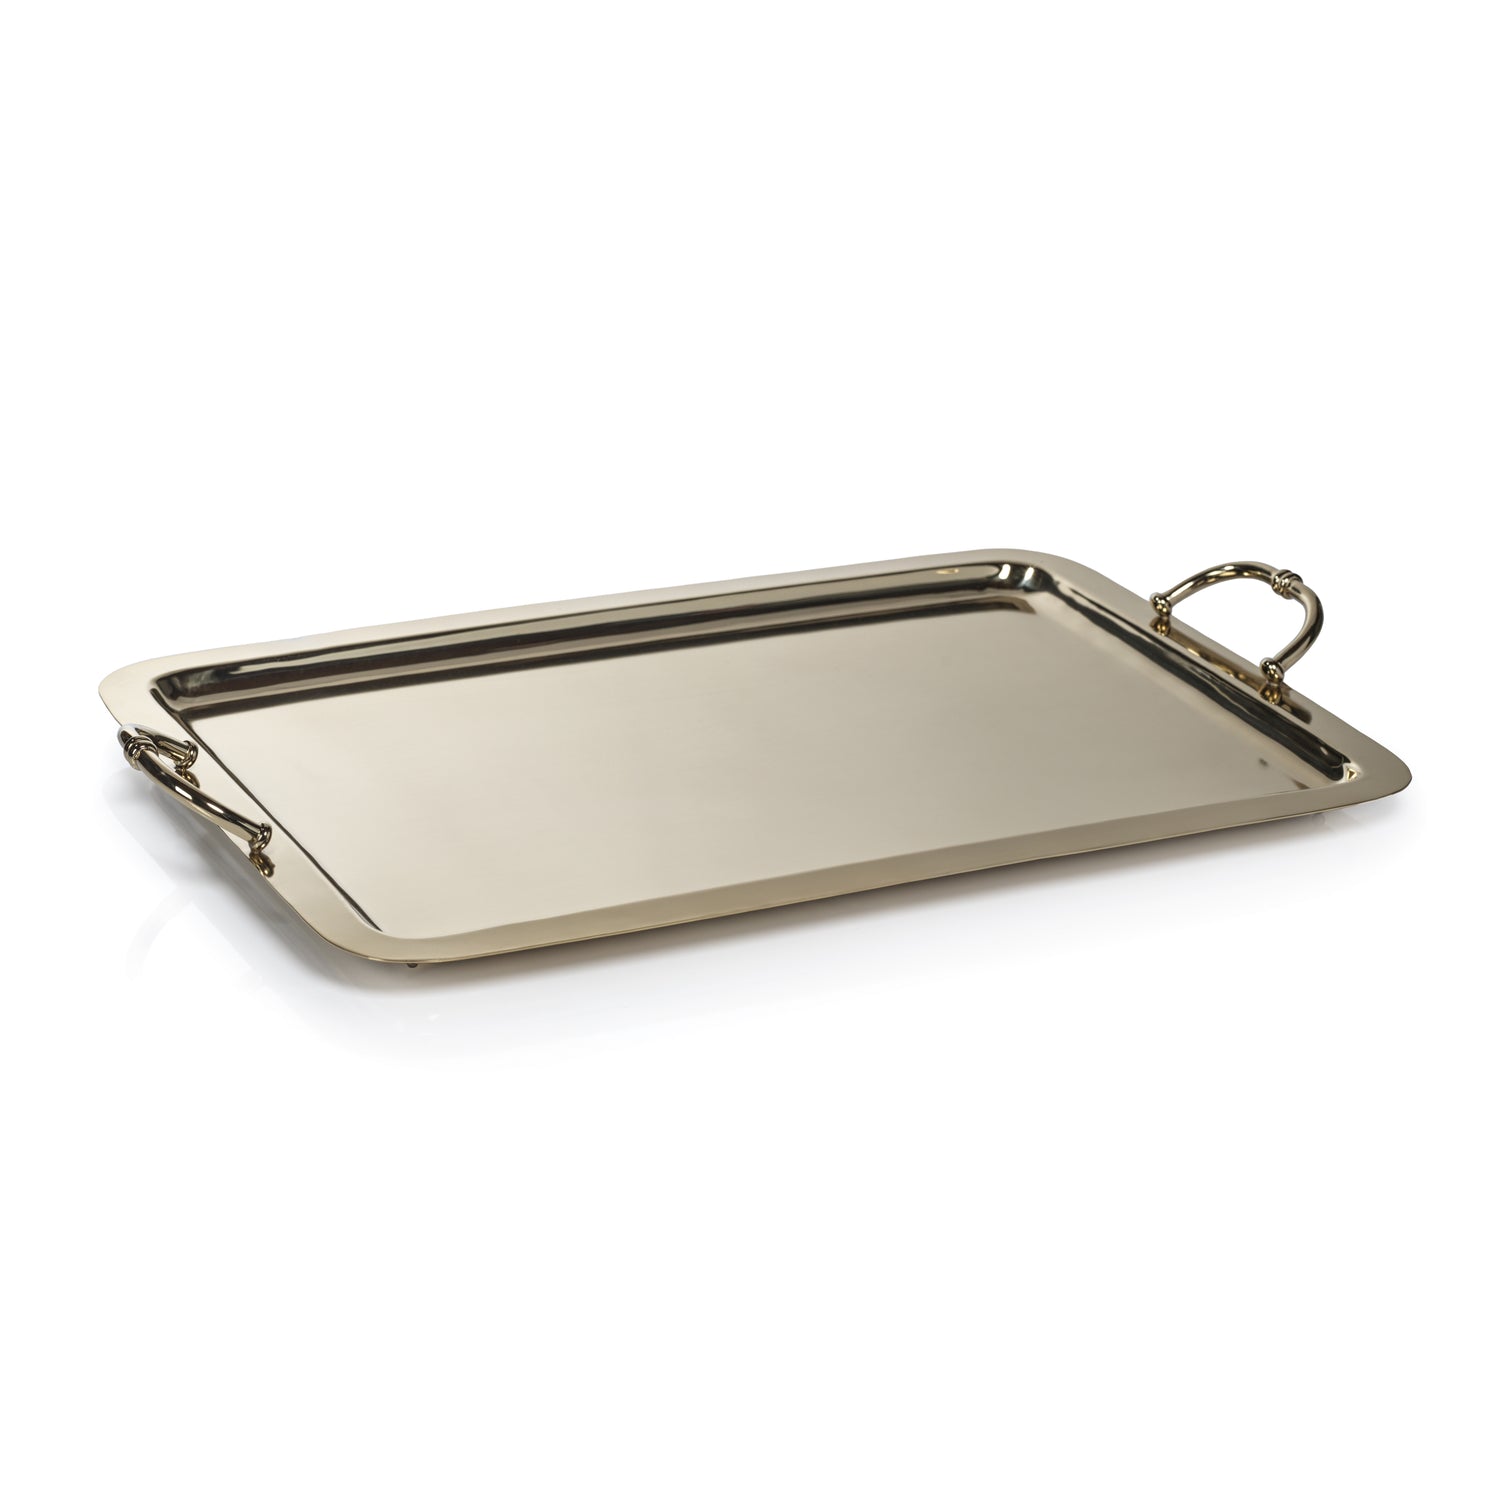 Manetta Steel & Brass Tray - Polished Gold - 5 sizes